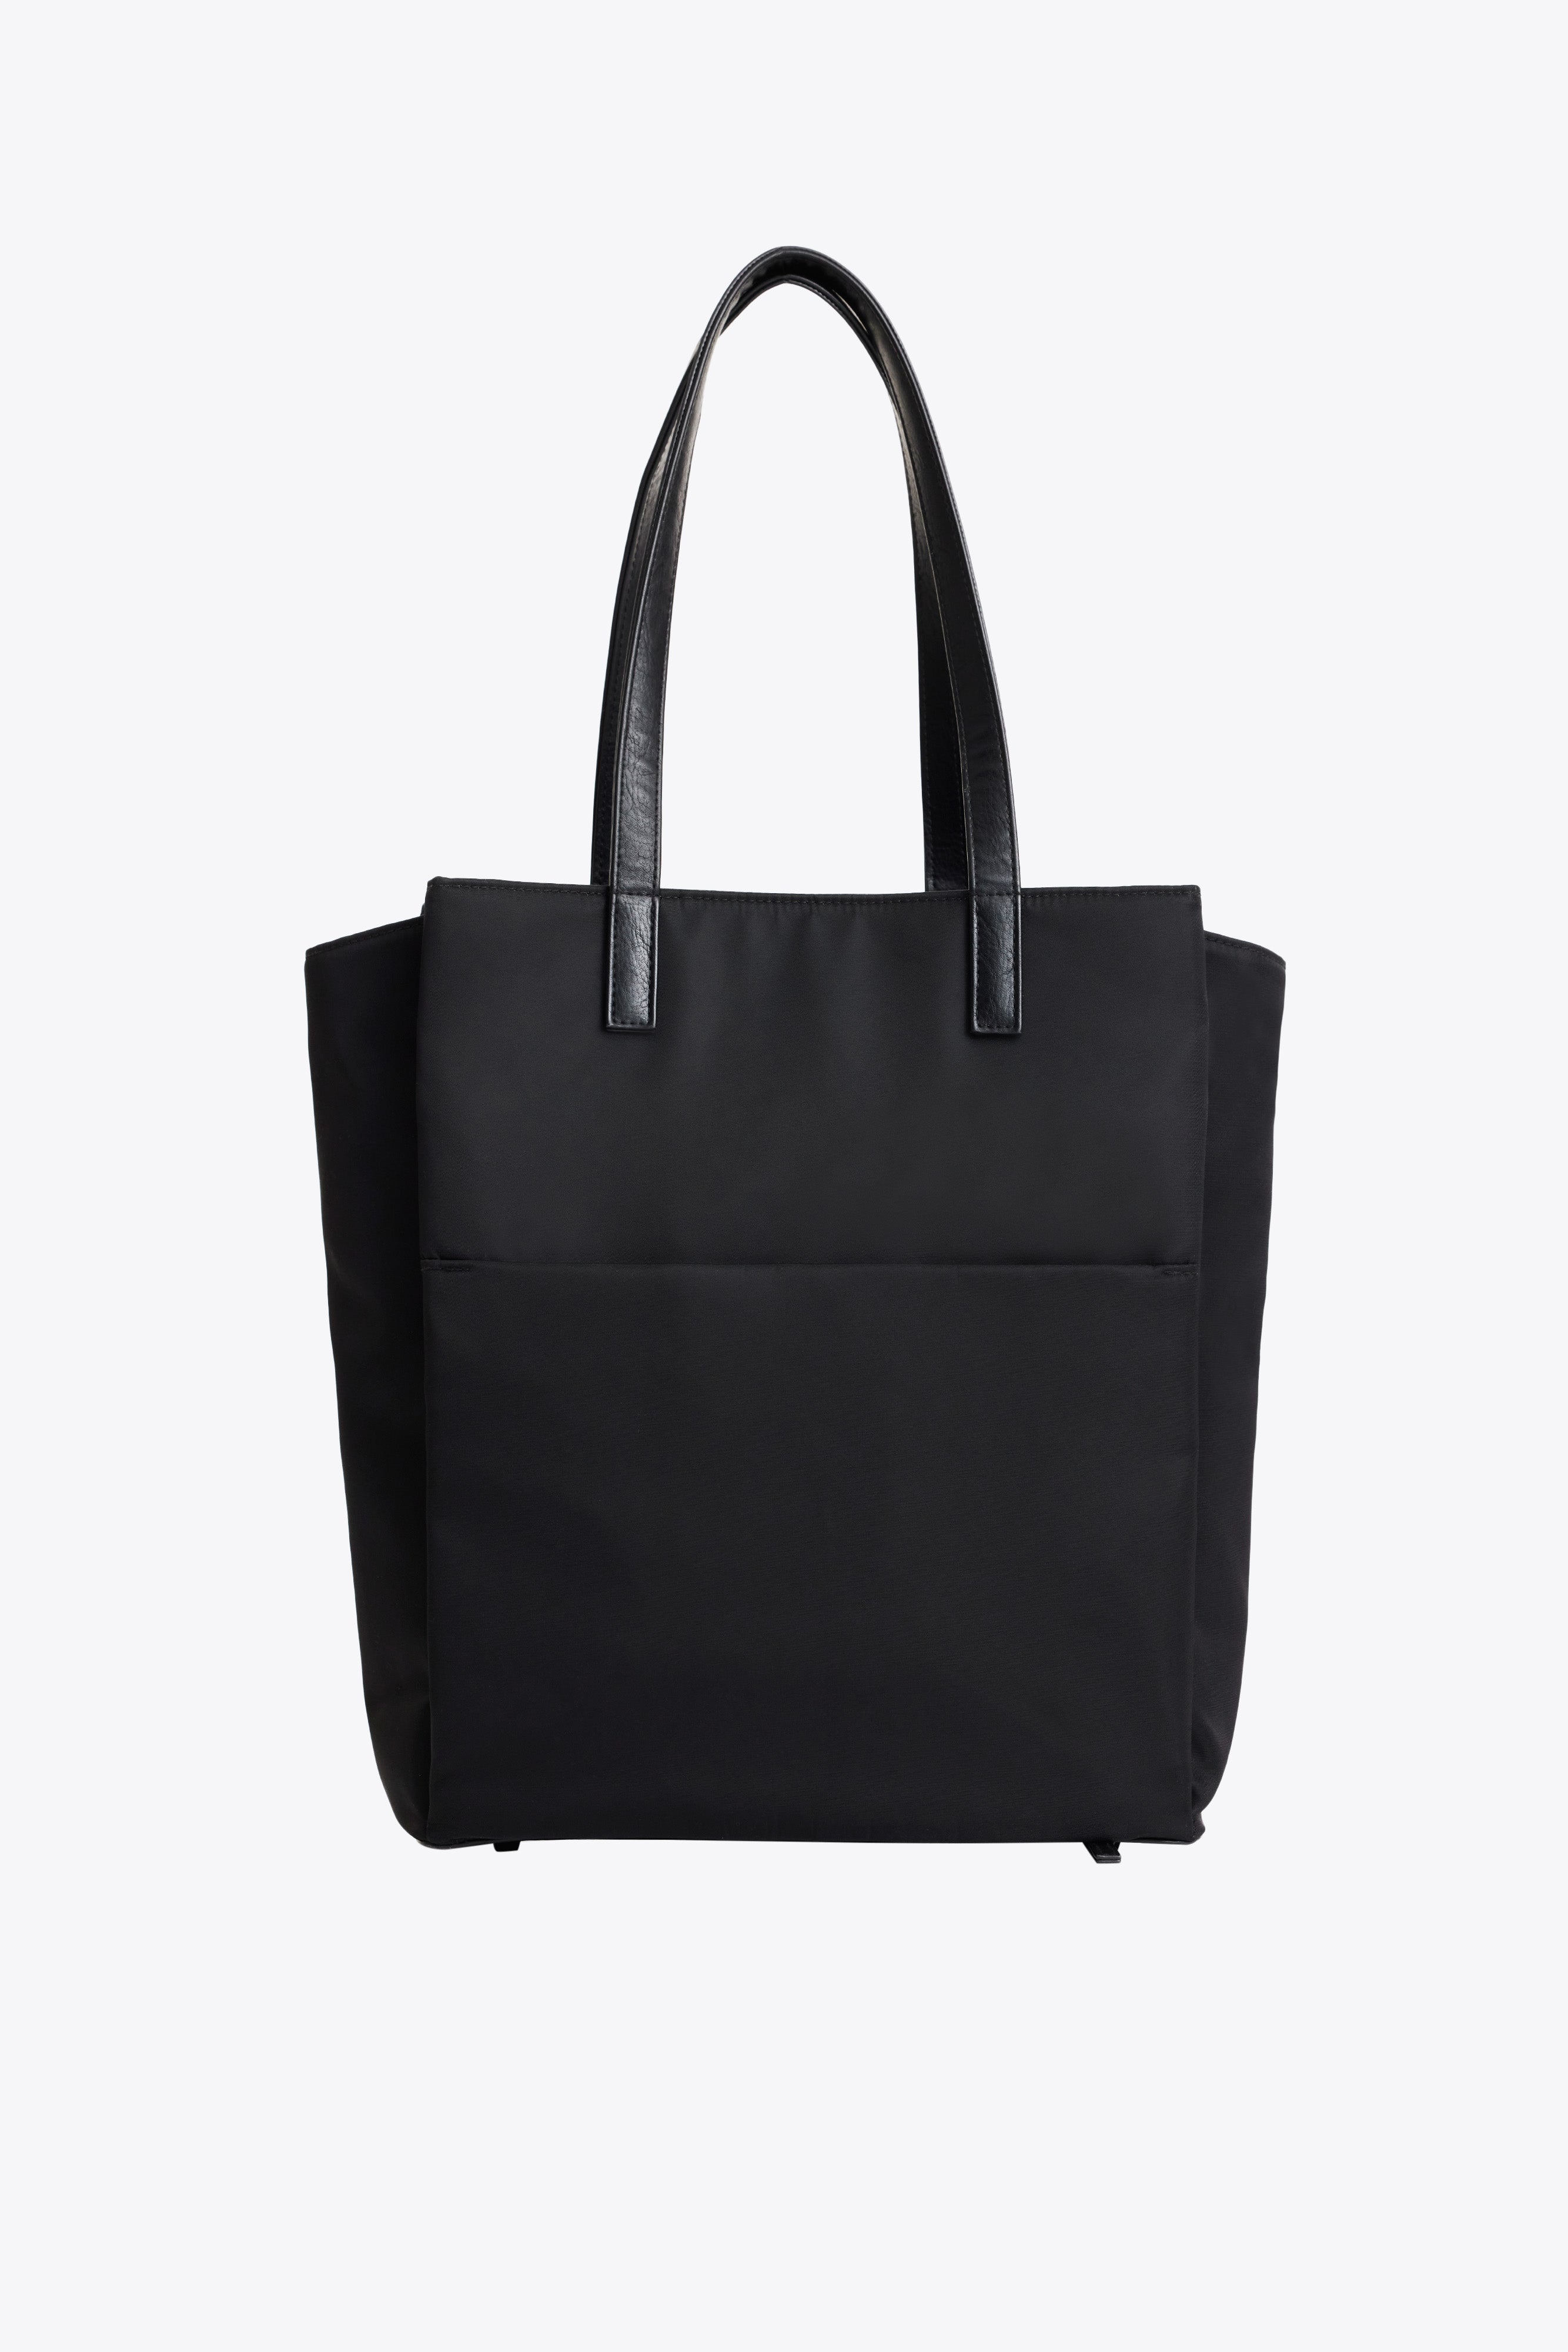 Béis 'The Commuter Tote' In Black - Black Commuter Tote For Work 